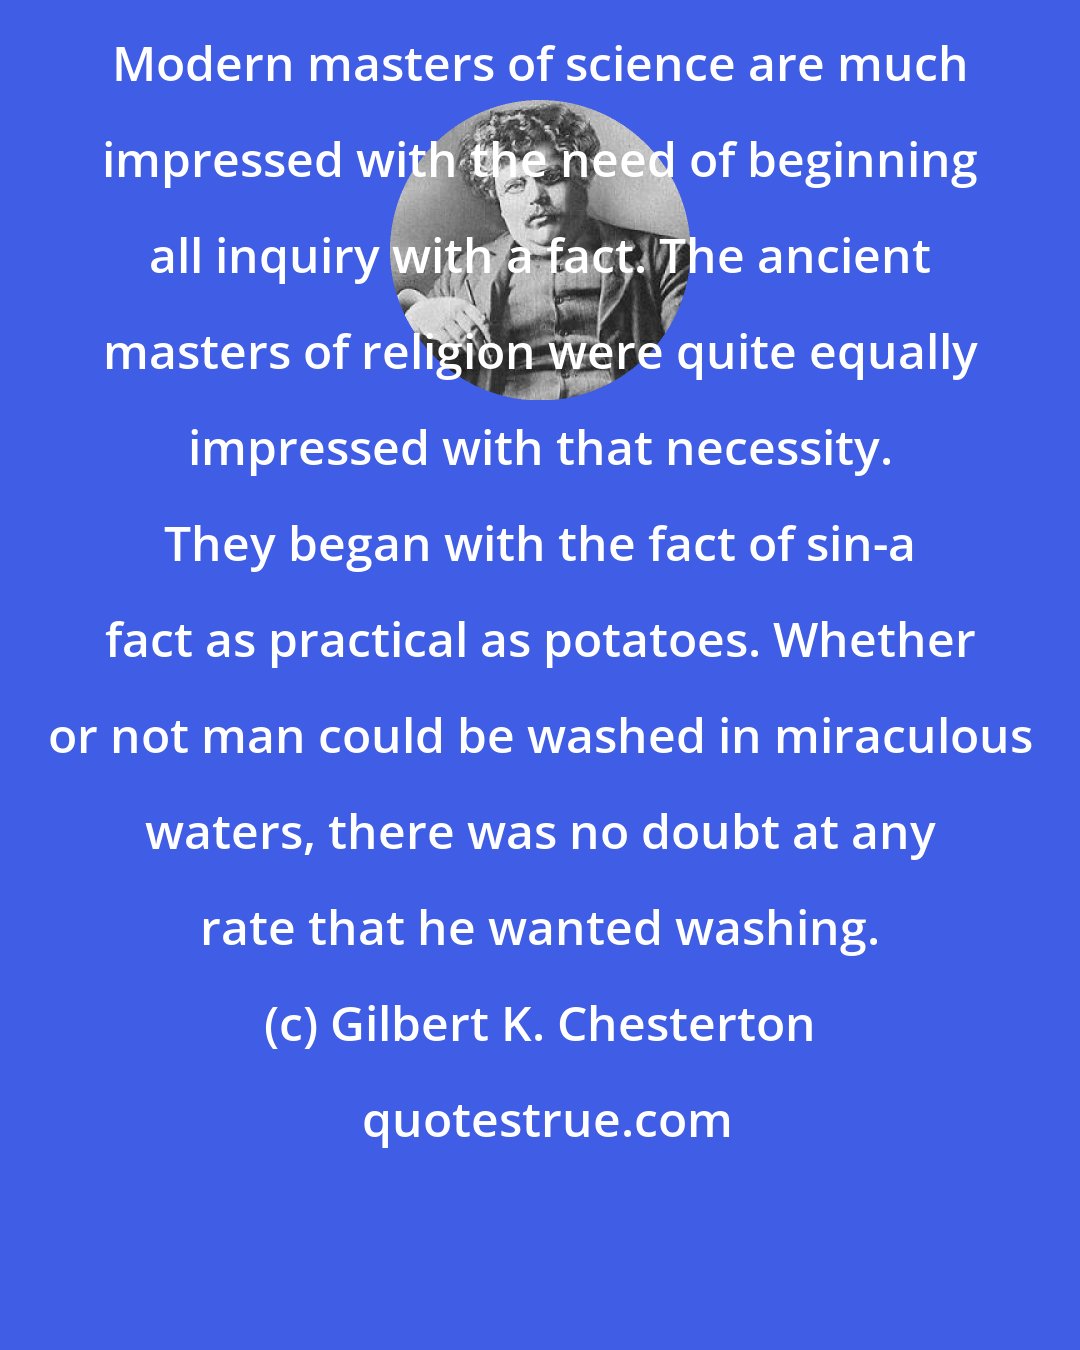 Gilbert K. Chesterton: Modern masters of science are much impressed with the need of beginning all inquiry with a fact. The ancient masters of religion were quite equally impressed with that necessity. They began with the fact of sin-a fact as practical as potatoes. Whether or not man could be washed in miraculous waters, there was no doubt at any rate that he wanted washing.